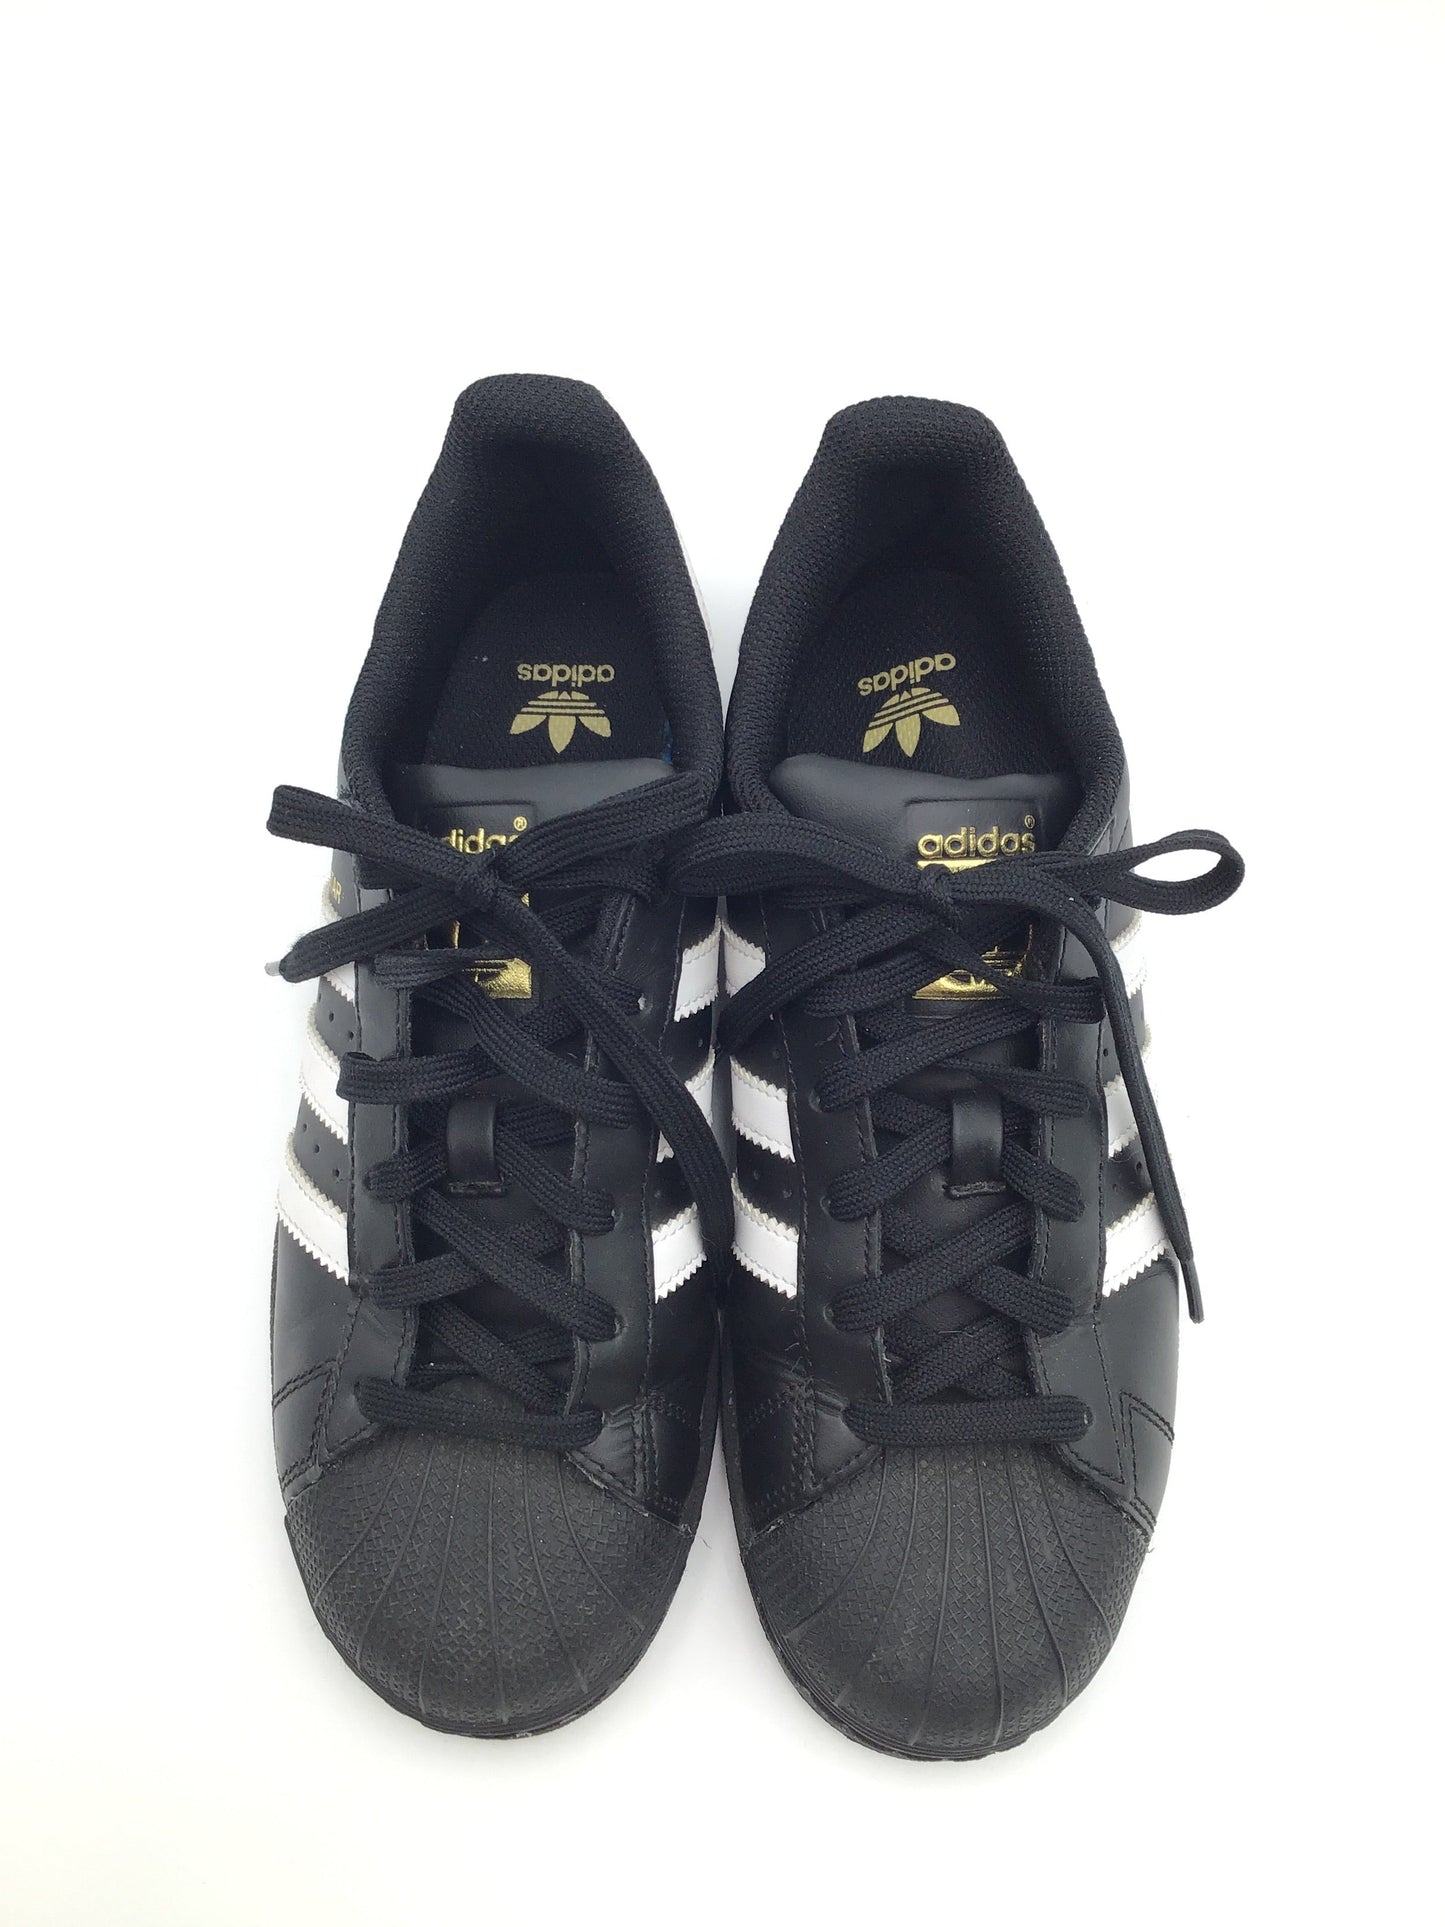 Black & Gold Shoes Sneakers Adidas, Size 5.5